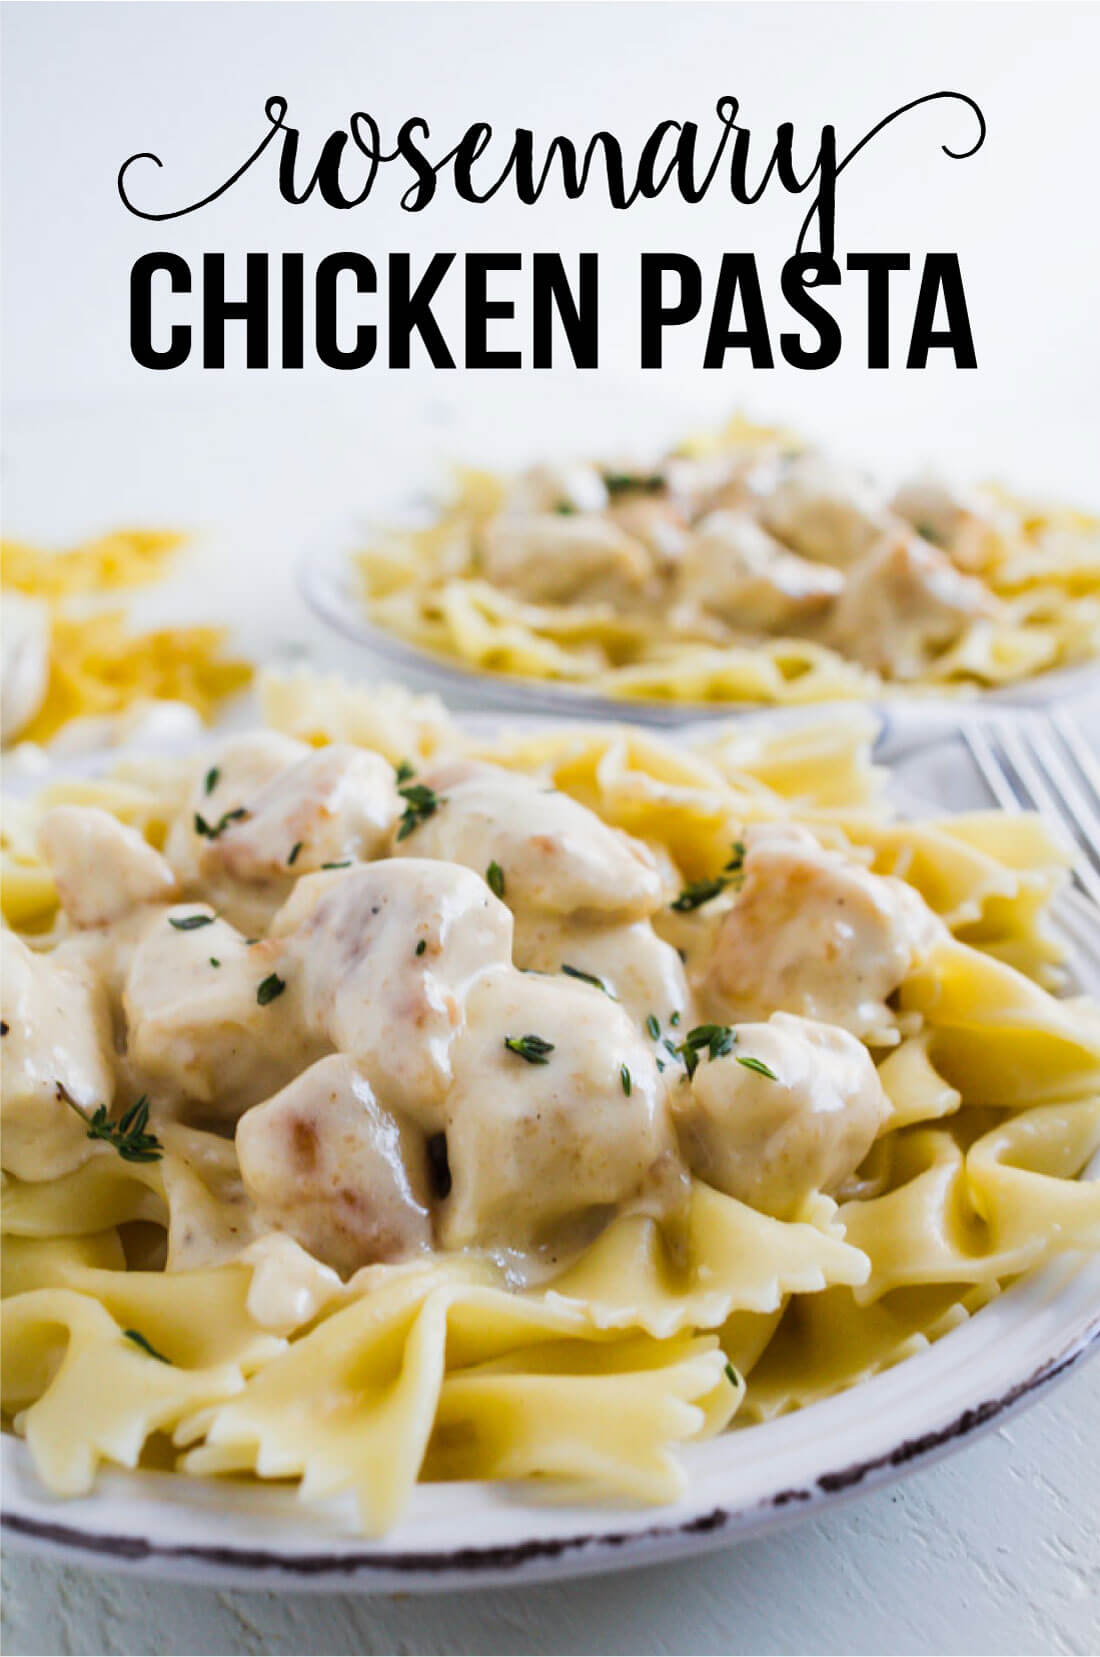 Rosemary Chicken Pasta - an easy main dish that has become a family favorite. www.thirtyhandmadedays.com